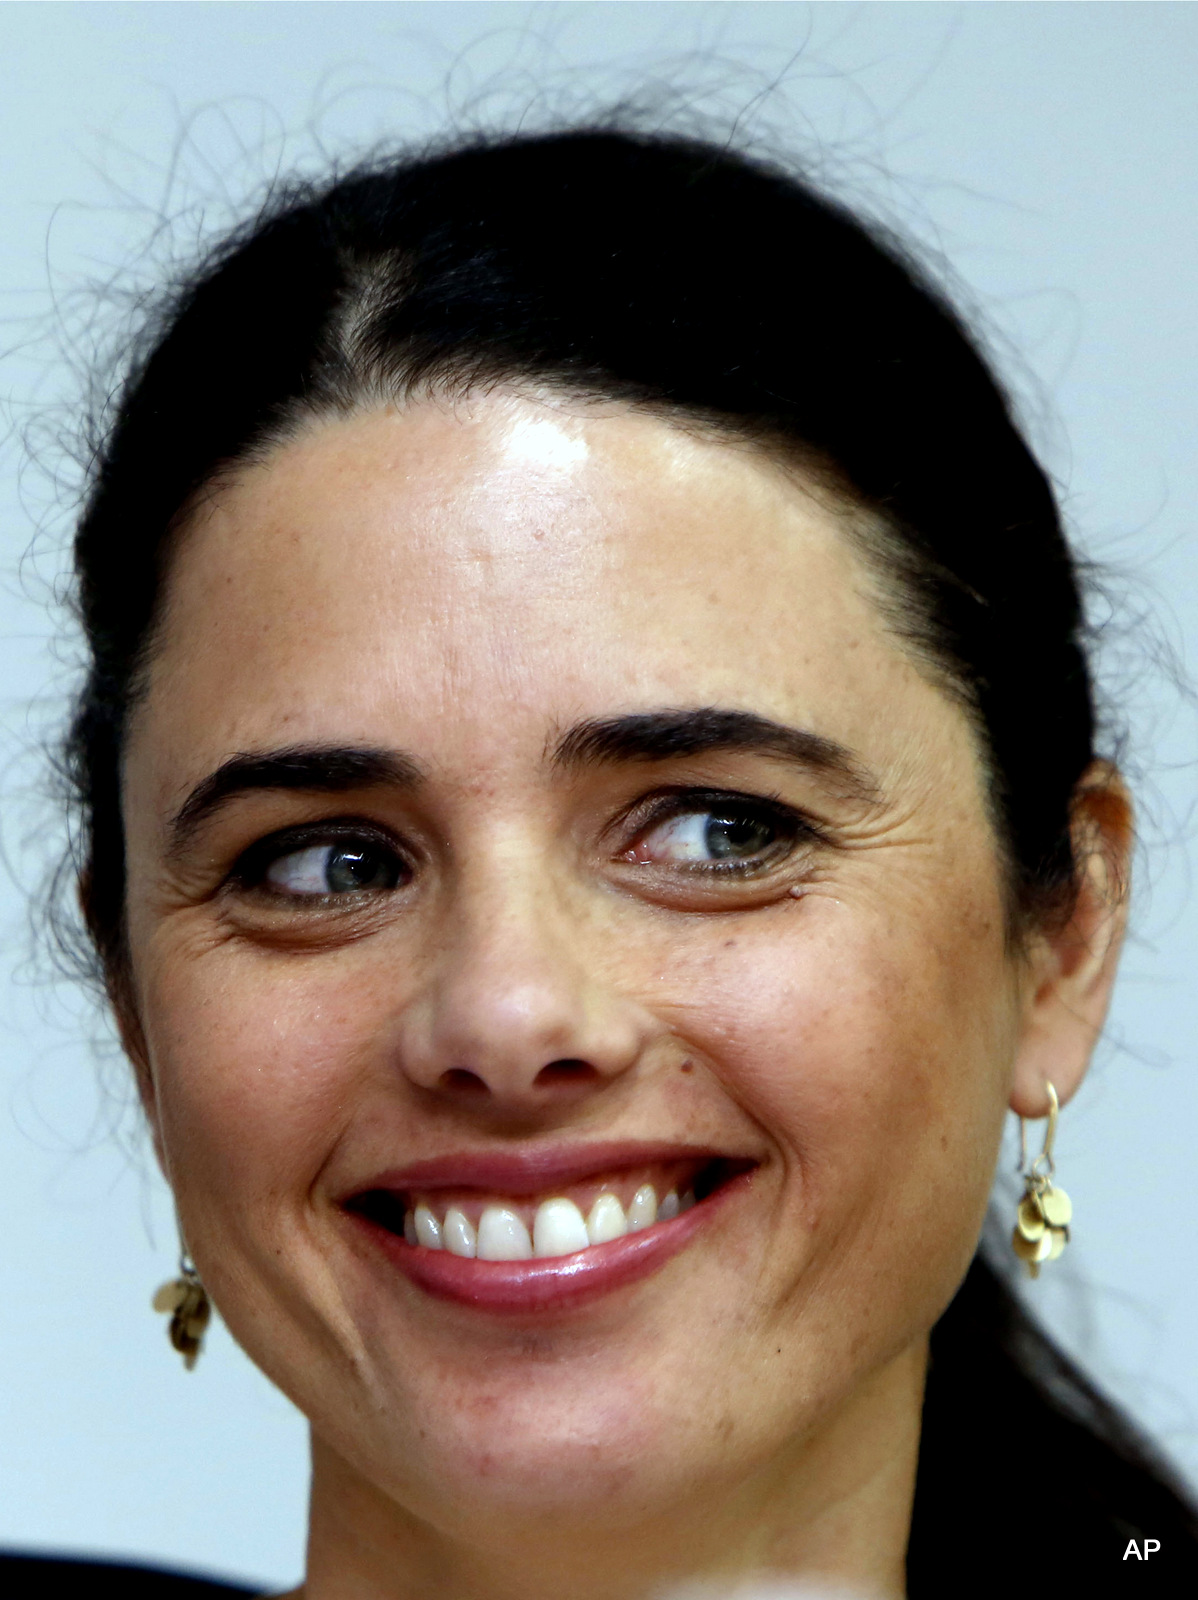 Israel's Justice Minister, Ayelet Shaked